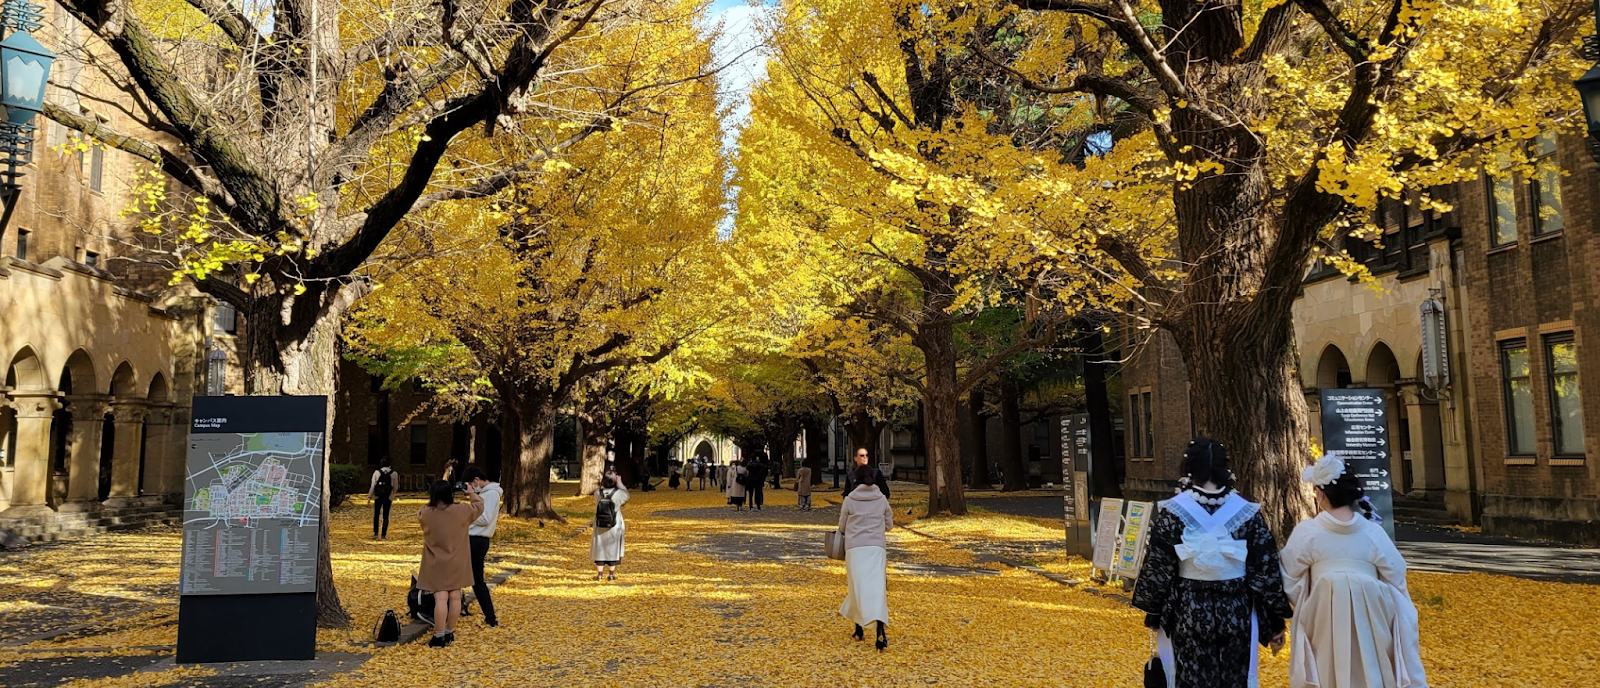 The Hongo campus in Autumn. Students walk on yellow ginko leaves.